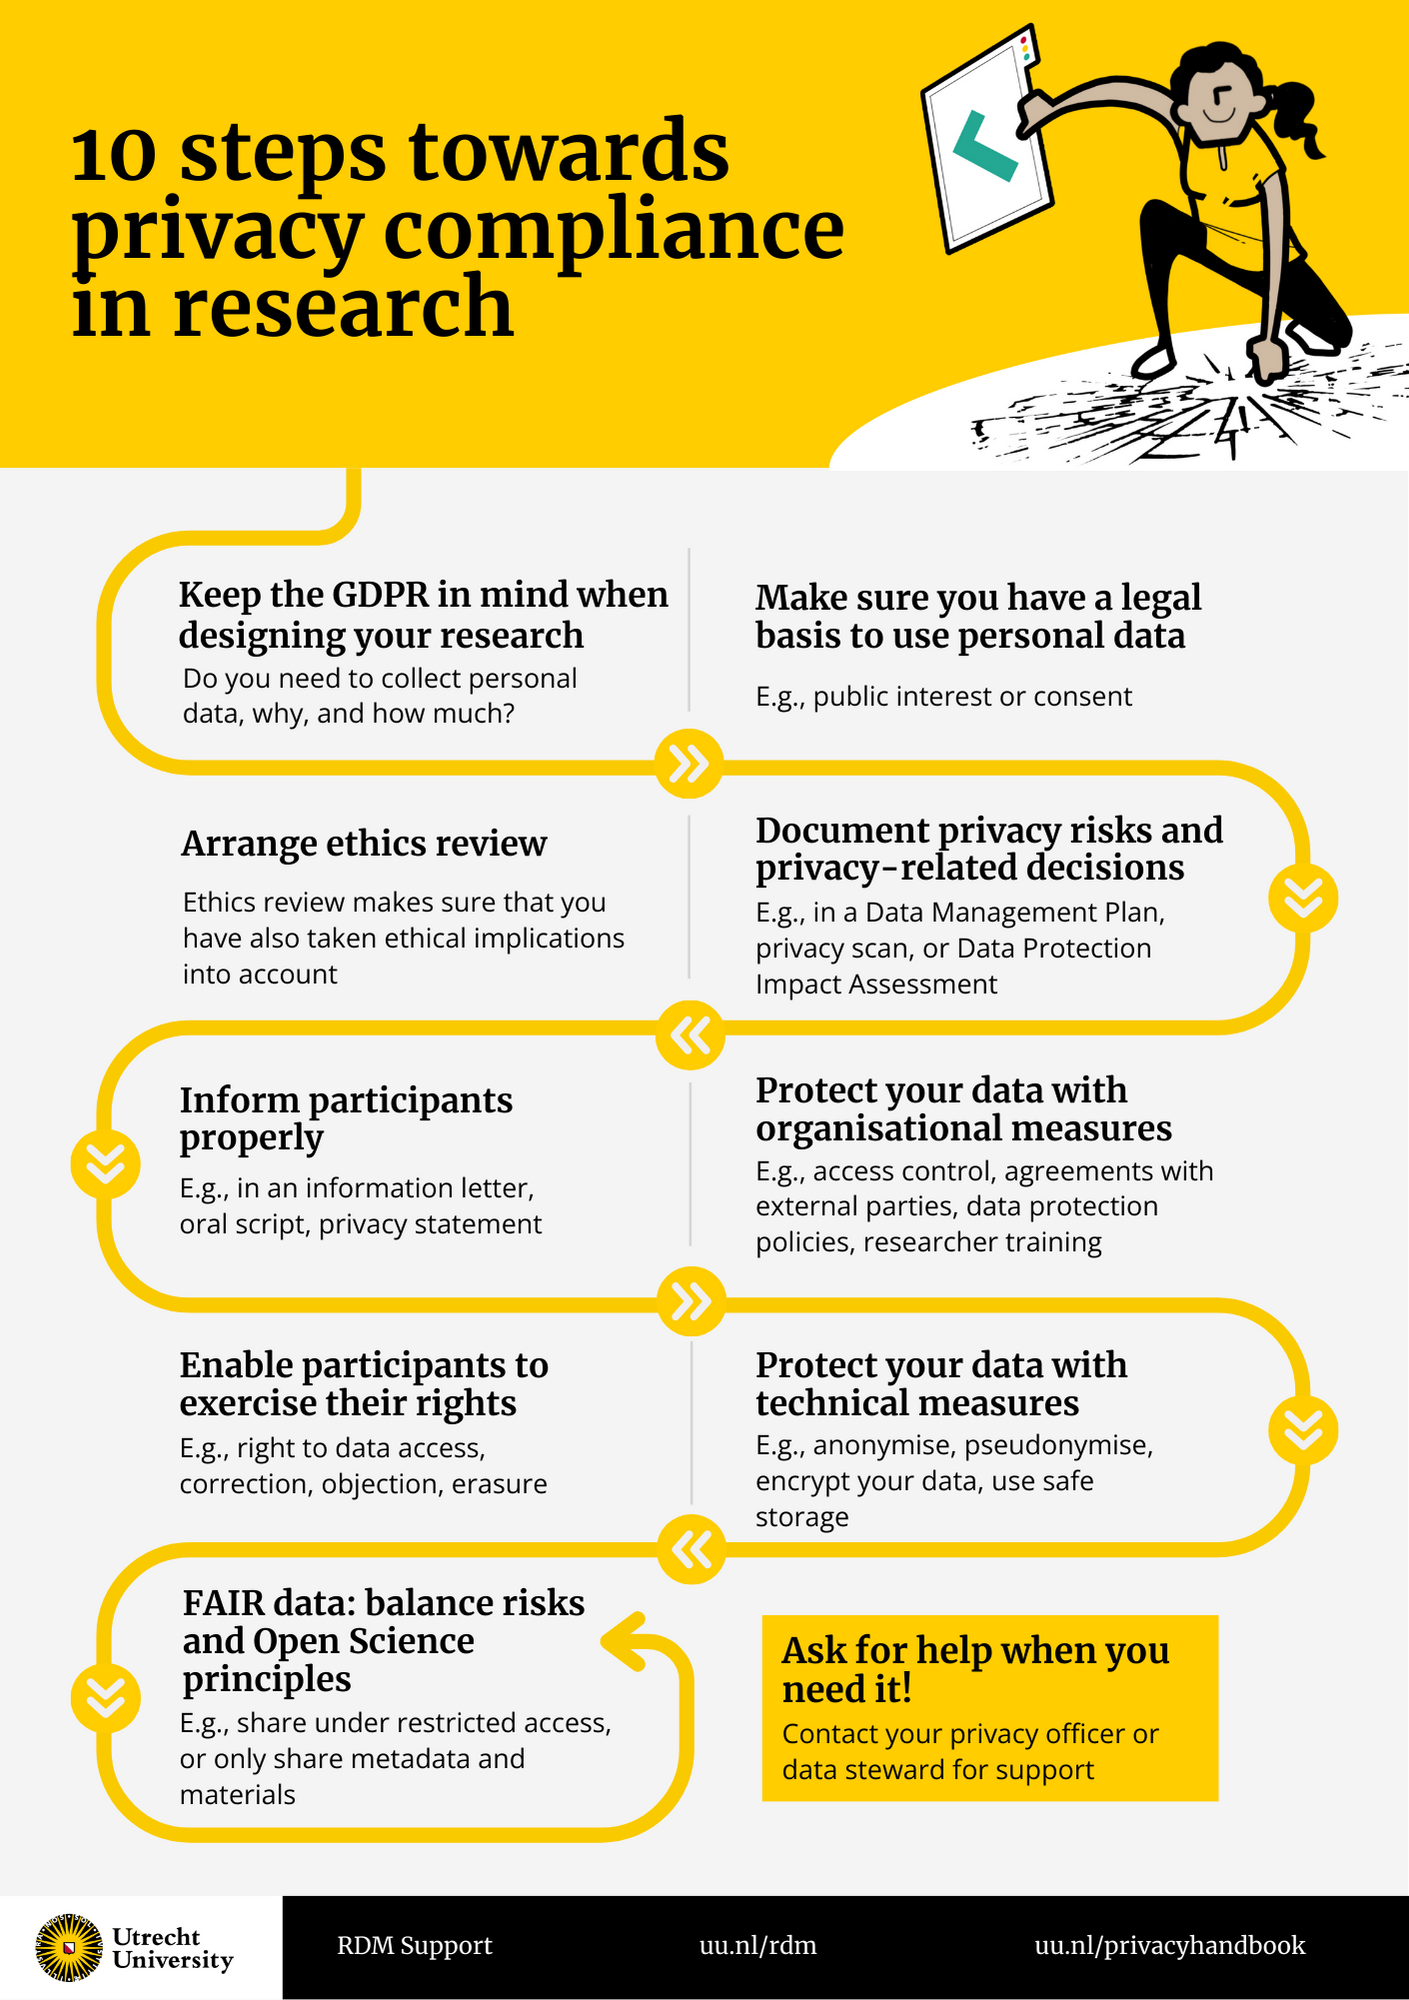 Image with 10 steps towards privacy compliance in research: (1) Keep the GDPR in mind when designing your research: Do you need to collect personal data, why, and how much? (2) Make sure you have a legal basis to use personal data, e.g., public interest or consent (3) Document privacy risks and privacy-related decisions, e.g., in a Data Management Plan, privacy scan, or Data Protection Impact Assessment (4) Arrange ethics review. Ethics review makes sure that you have also taken ethical implications into account (5) Inform participants properly, e.g., in an information letter, oral script, privacy statement (6) Protect your data with organisational measures, e.g., access control, agreements with external parties, data protection policies, researcher training (7) Protect your data with technical measures, e.g., anonymise, pseudonymise, encrypt your data, use safe storage (8) Enable participants to exercise their rights, e.g., right to data access, correction, objection, erasure (9) FAIR data: balance risks and Open Science principles, e.g., share under restricted access, or only share metadata and materials (10) Ask for help when you need it! Contact your privacy officer or data steward for support